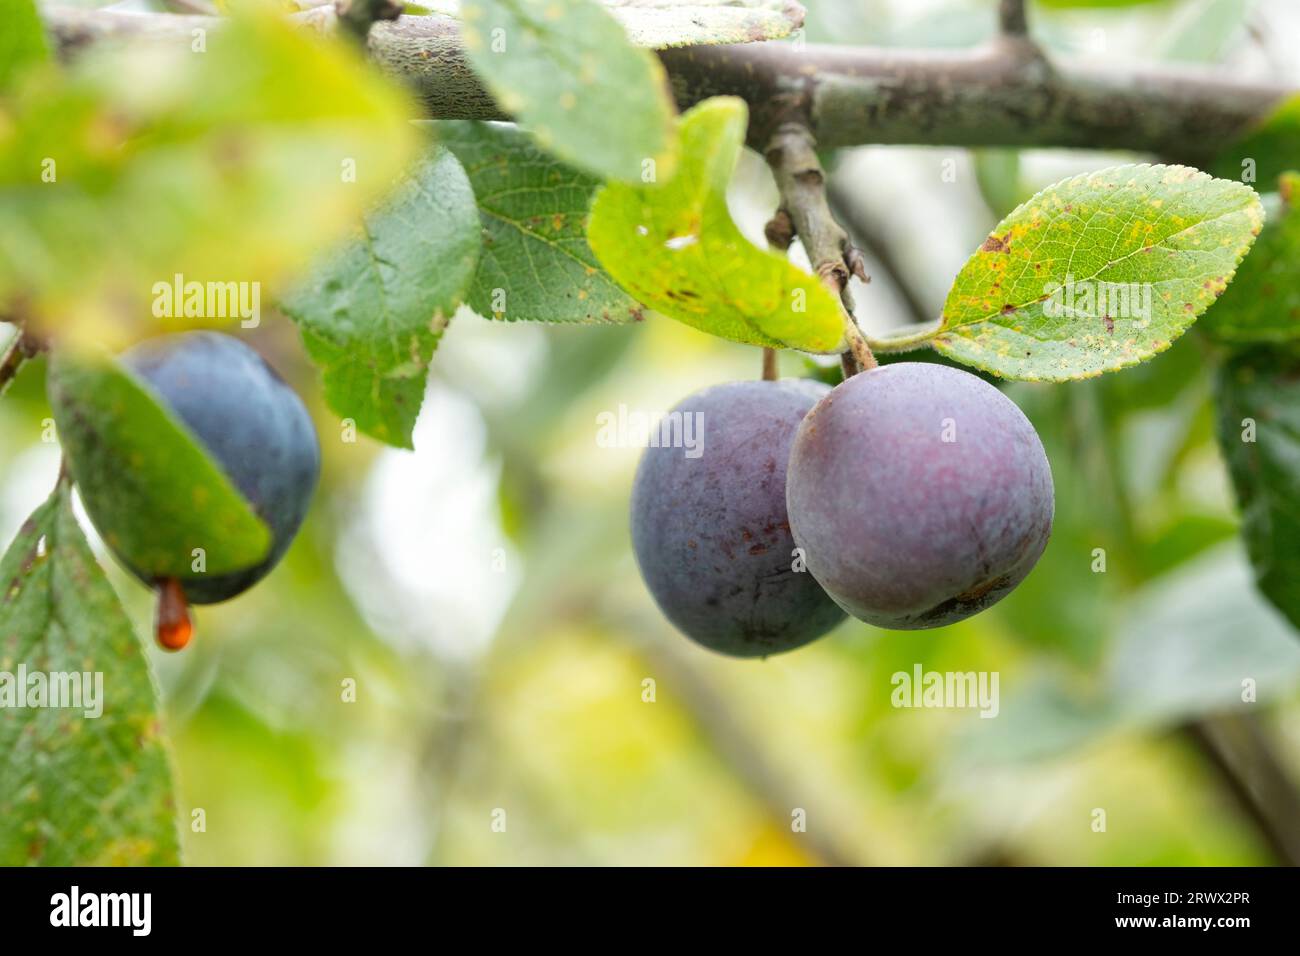 Ripe Damson fruits, Prunus domestica, growing on a wild Damson tree in the English countryside during late summer Stock Photo